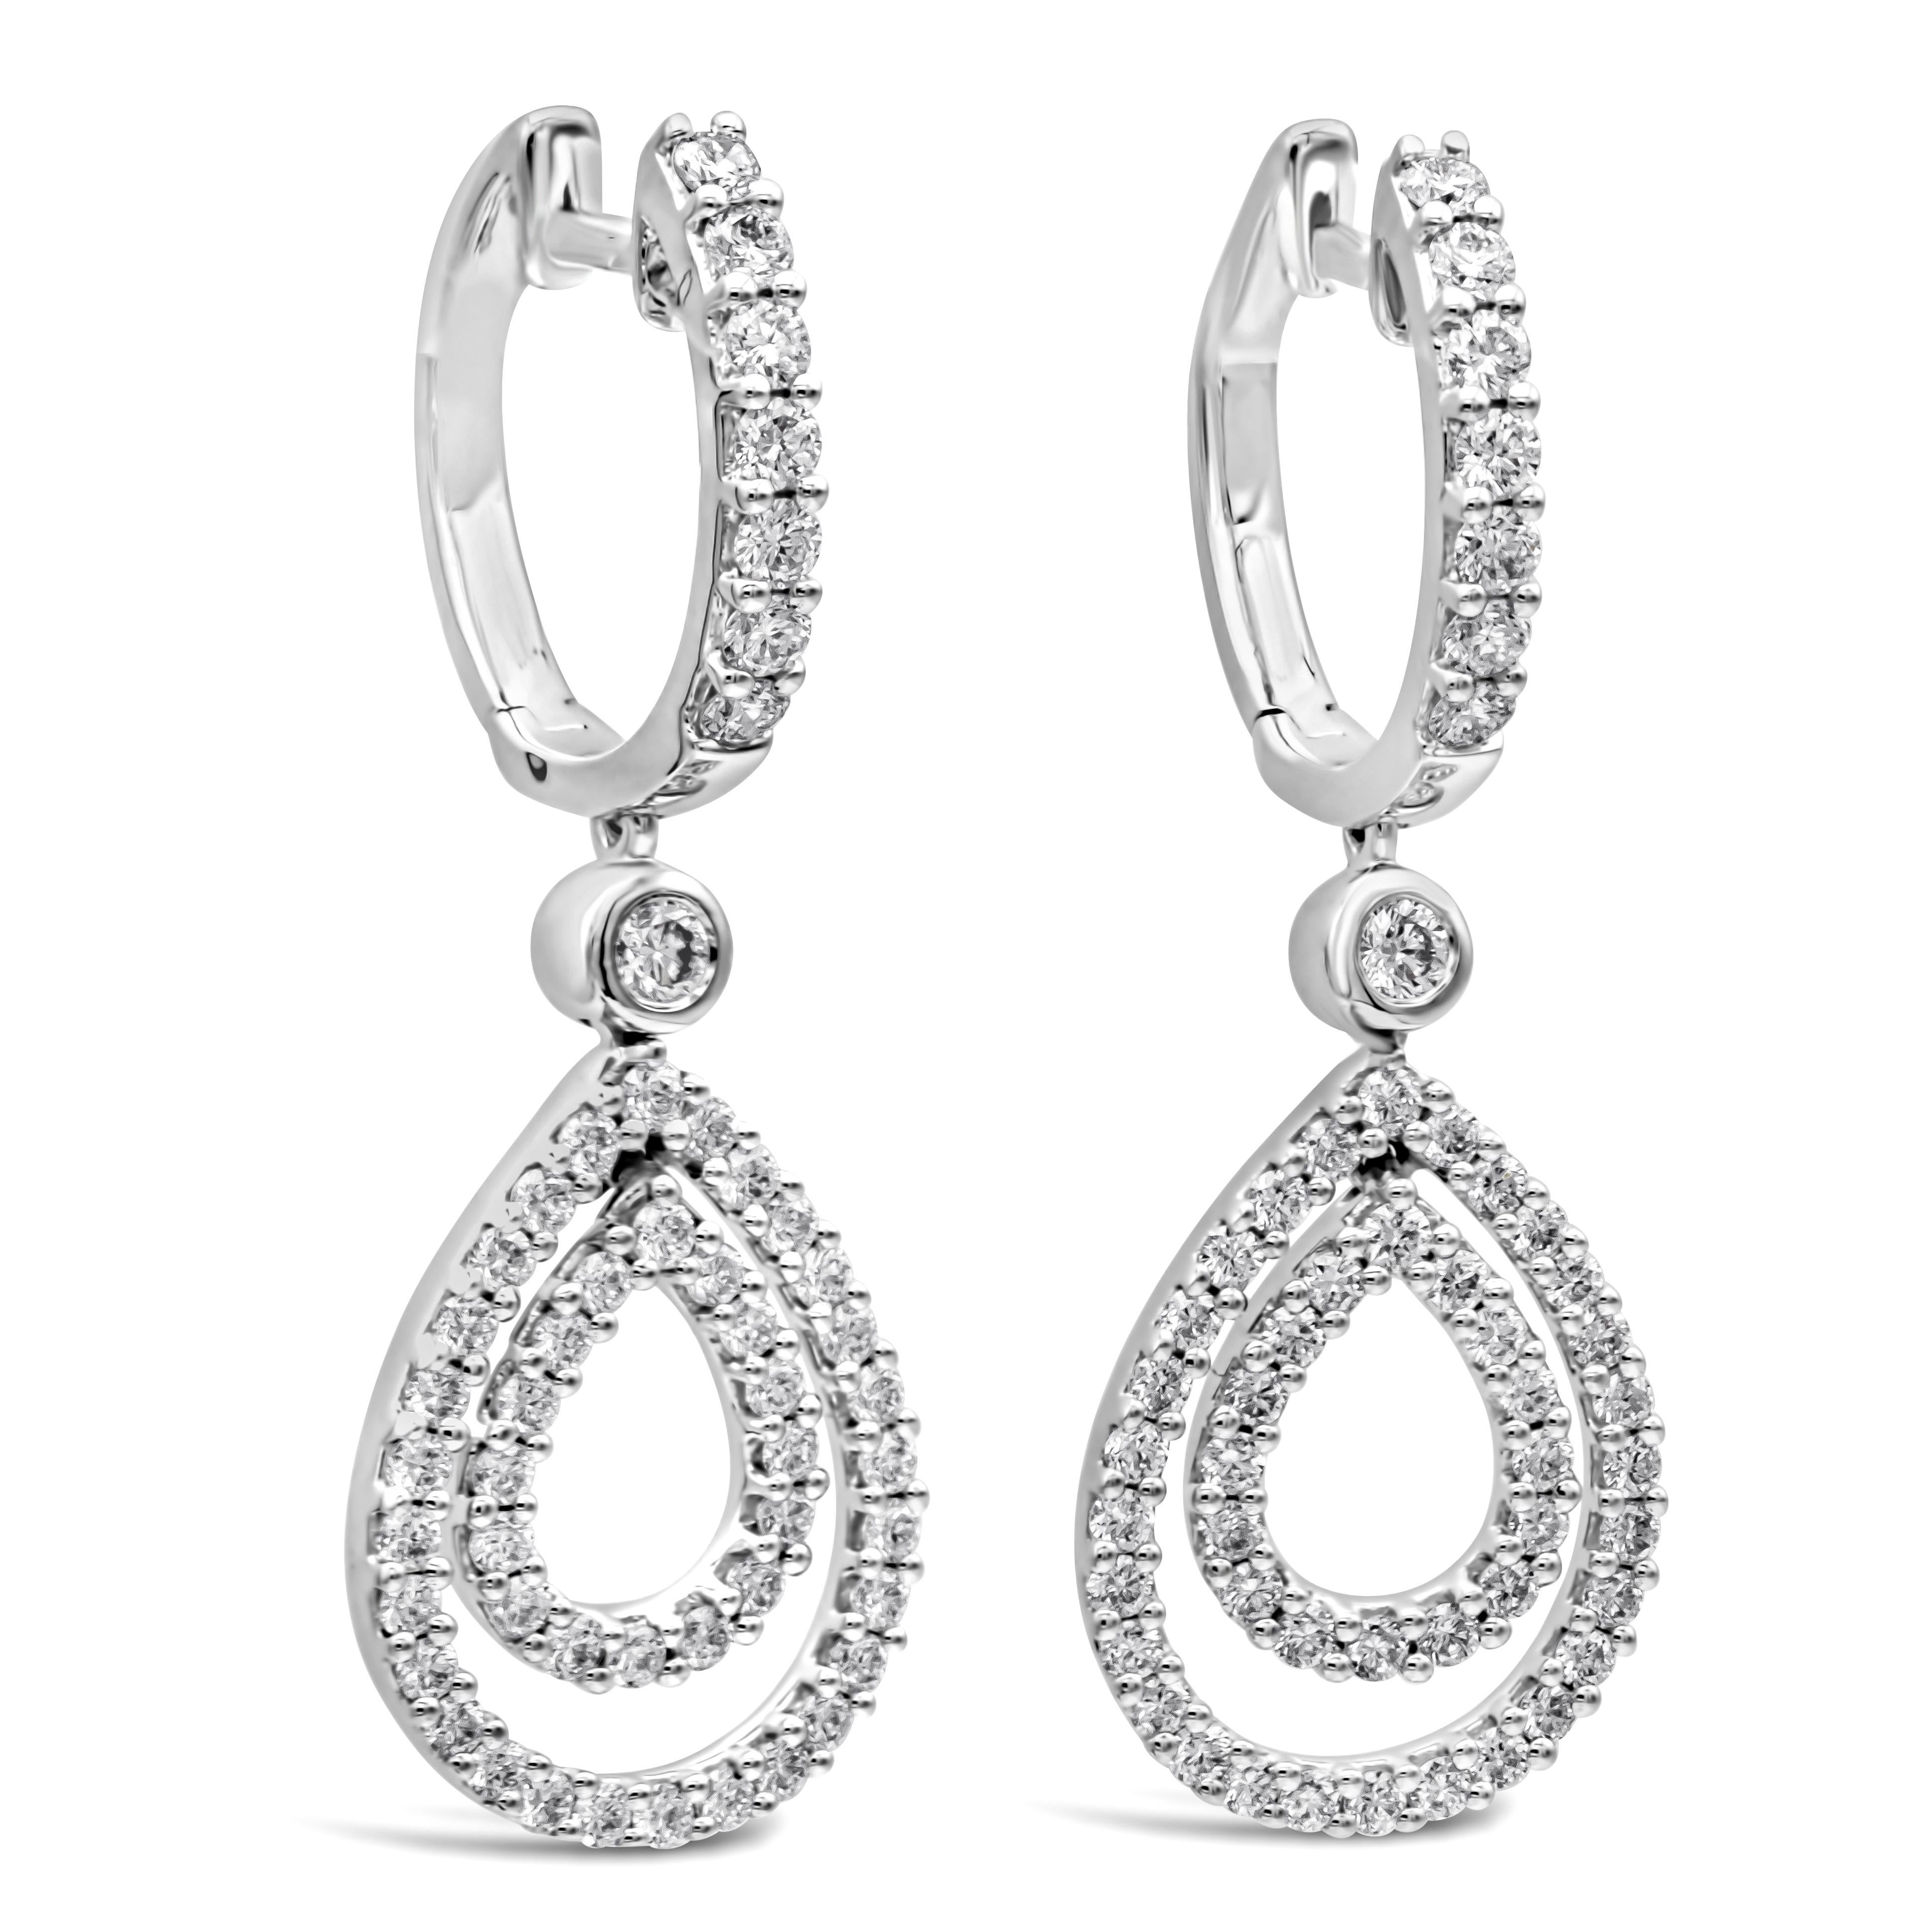 This classy dangle earrings showcasing a brilliant round cut diamonds set in a beautiful double pear shape halo open-work design weighing 1.04 carats total, F-G color and VS-SI in clarity. Attached to an accented lever-back settings made in 18k